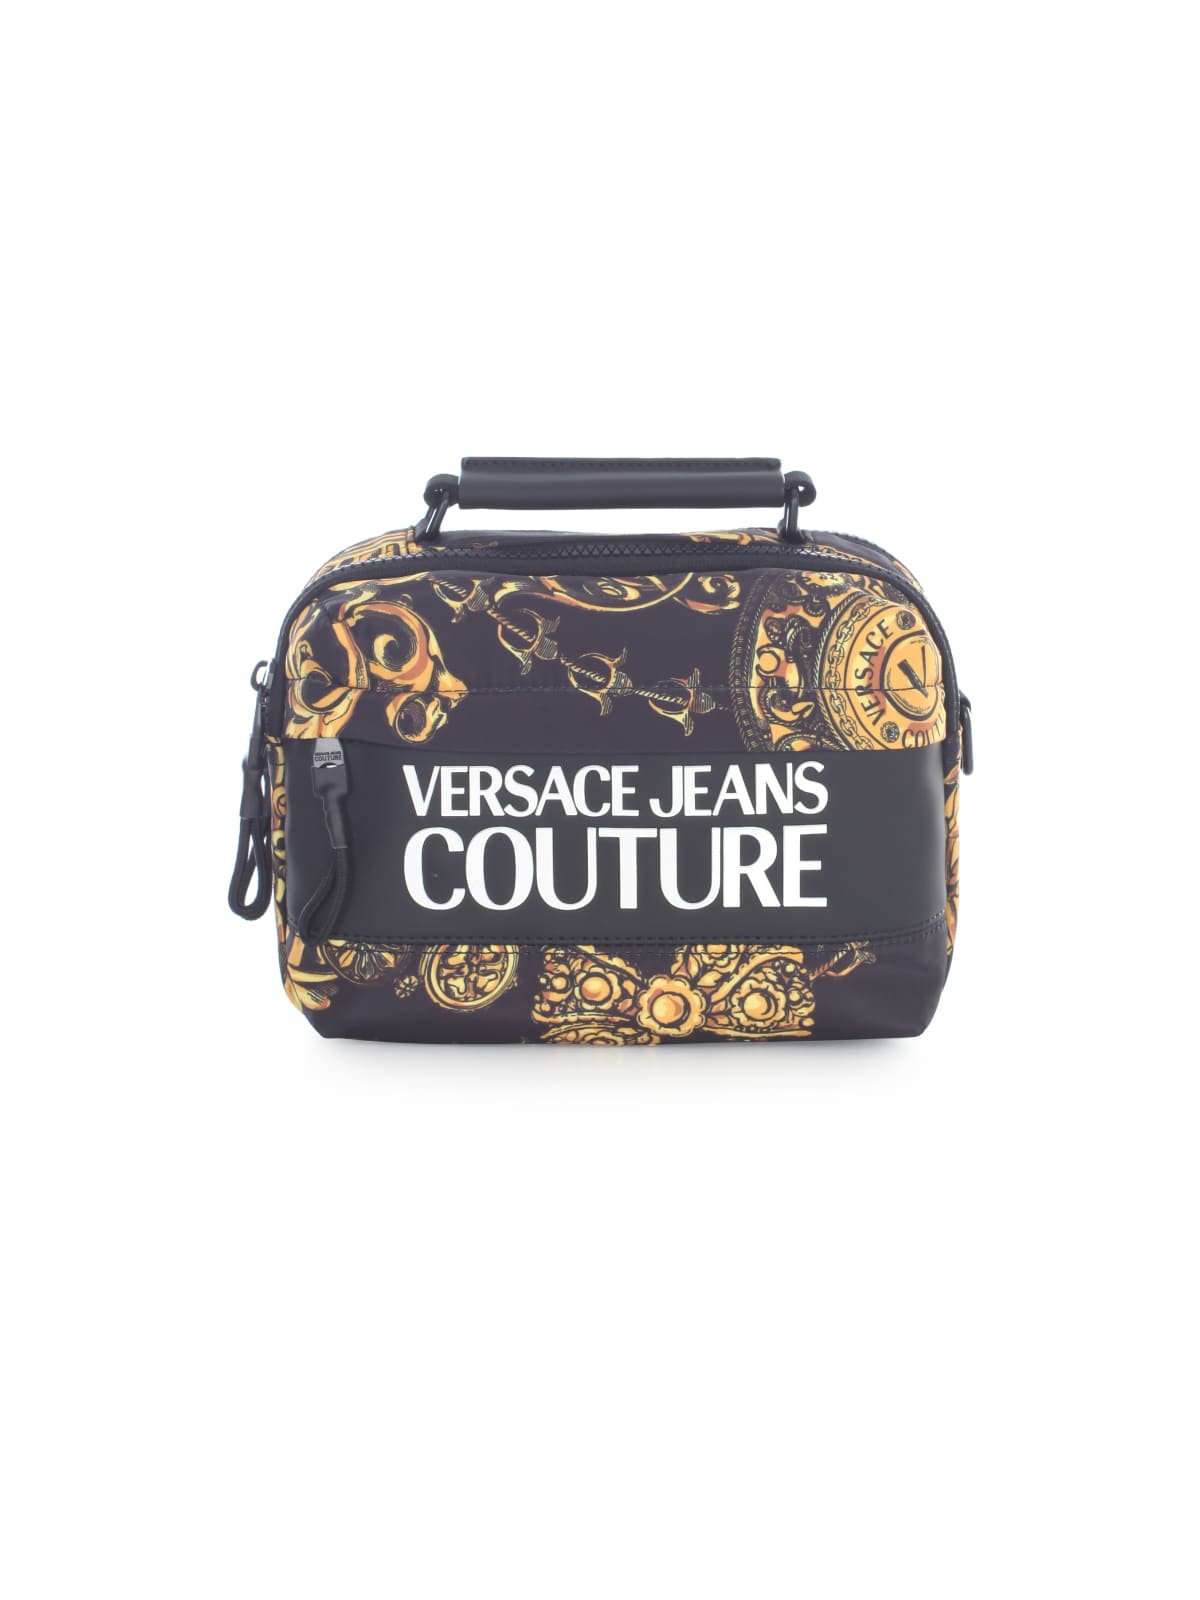 Versace Jeans Couture Sketch 9 Bags Printed Nylon Macrologo Crossbody